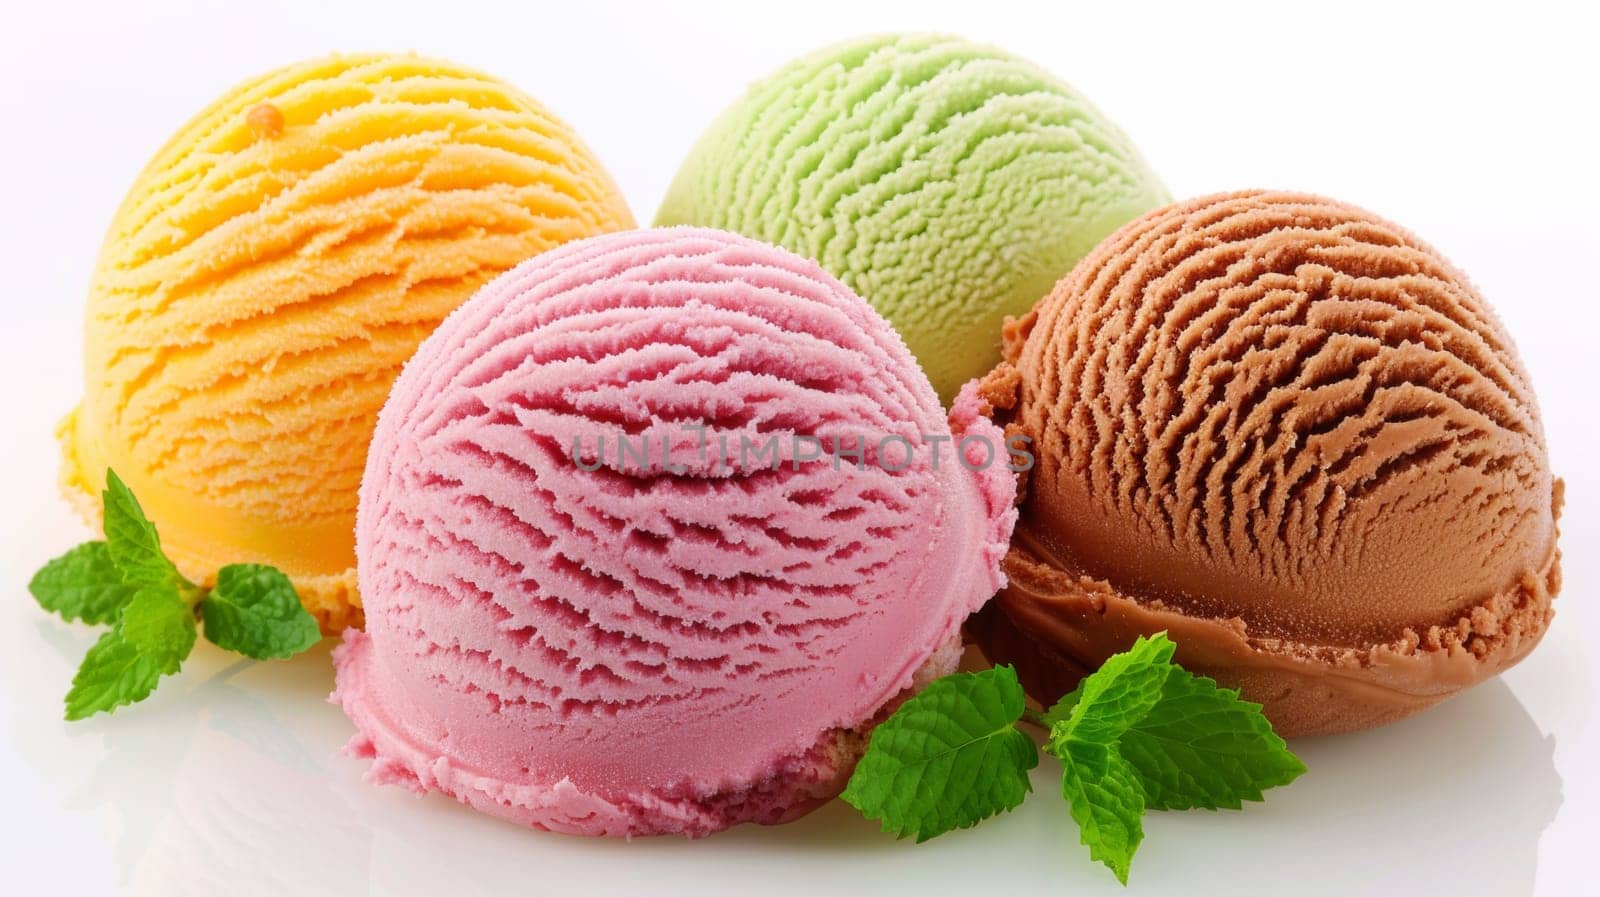 Three different colored ice cream cones with mint leaves on top